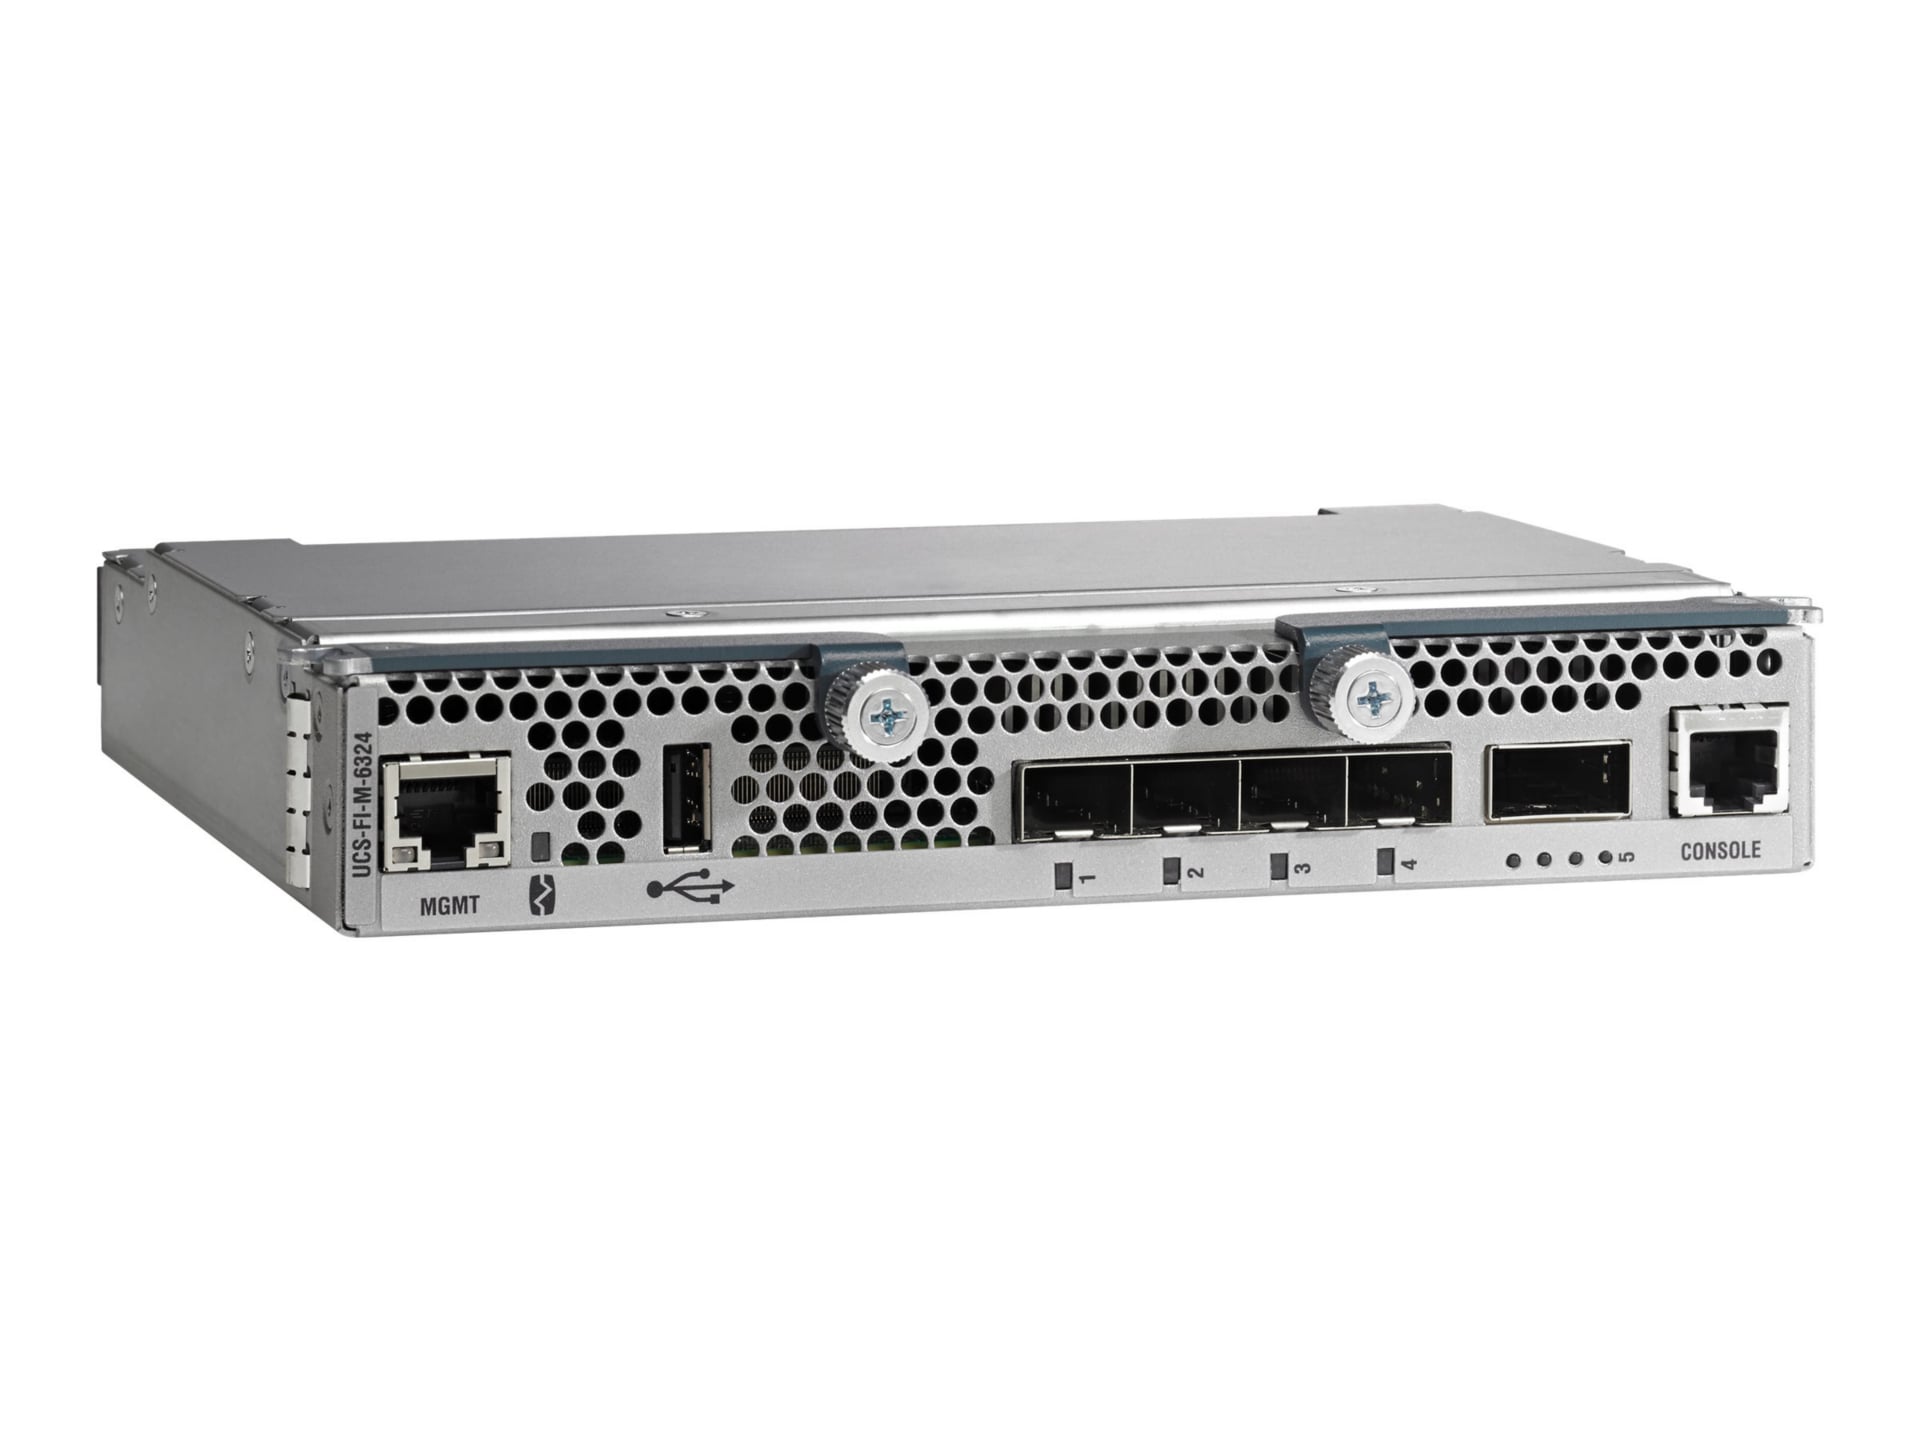 Cisco UCS 6324 Fabric Interconnect - switch - managed - plug-in module